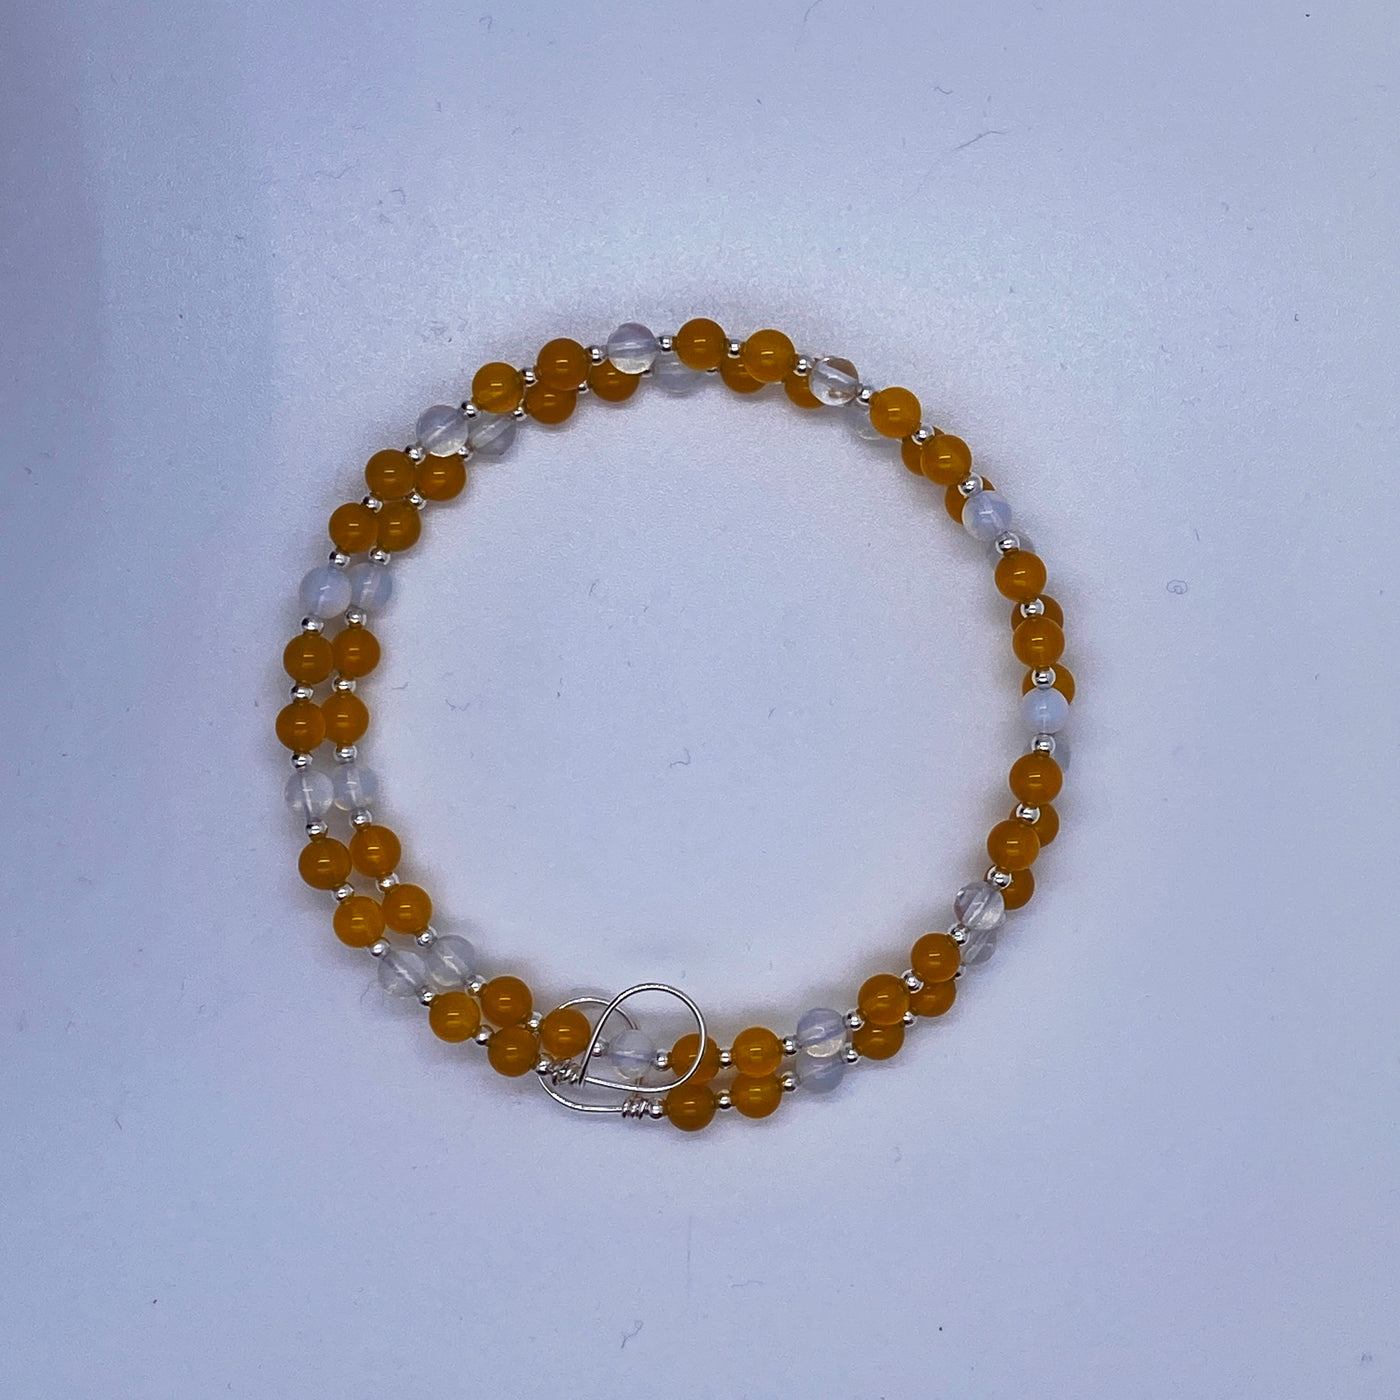 Yellow agate and opalite 4 mm small pearls bracelet.